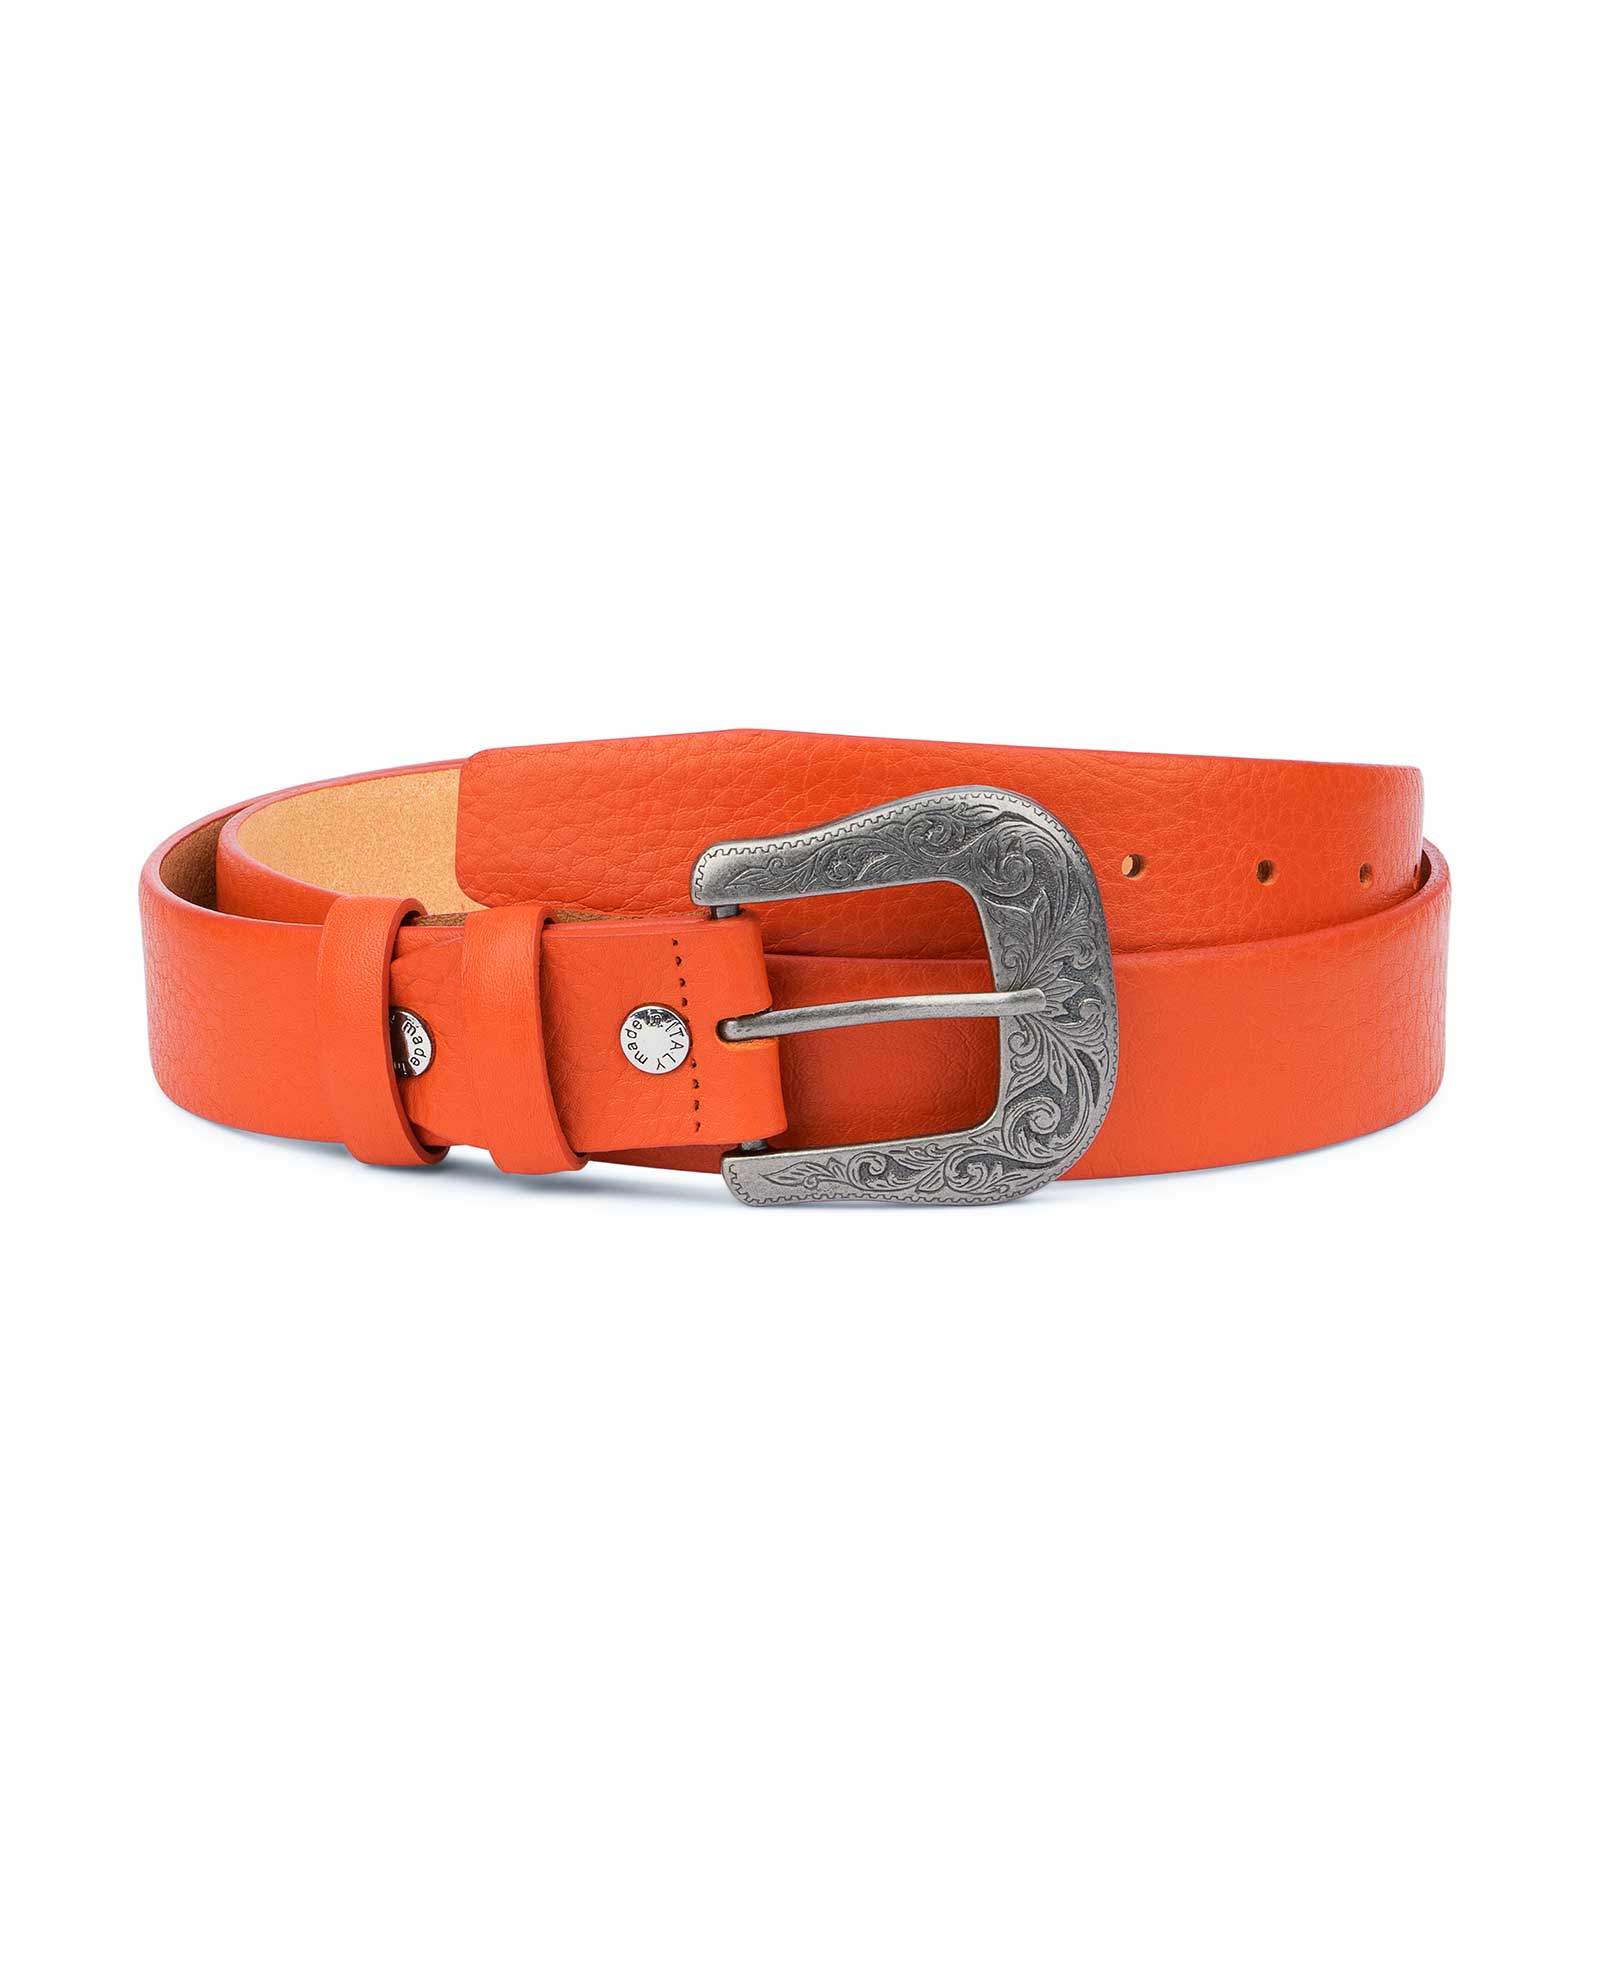 Capo Pelle Men's Red Belt with Gold Buckle